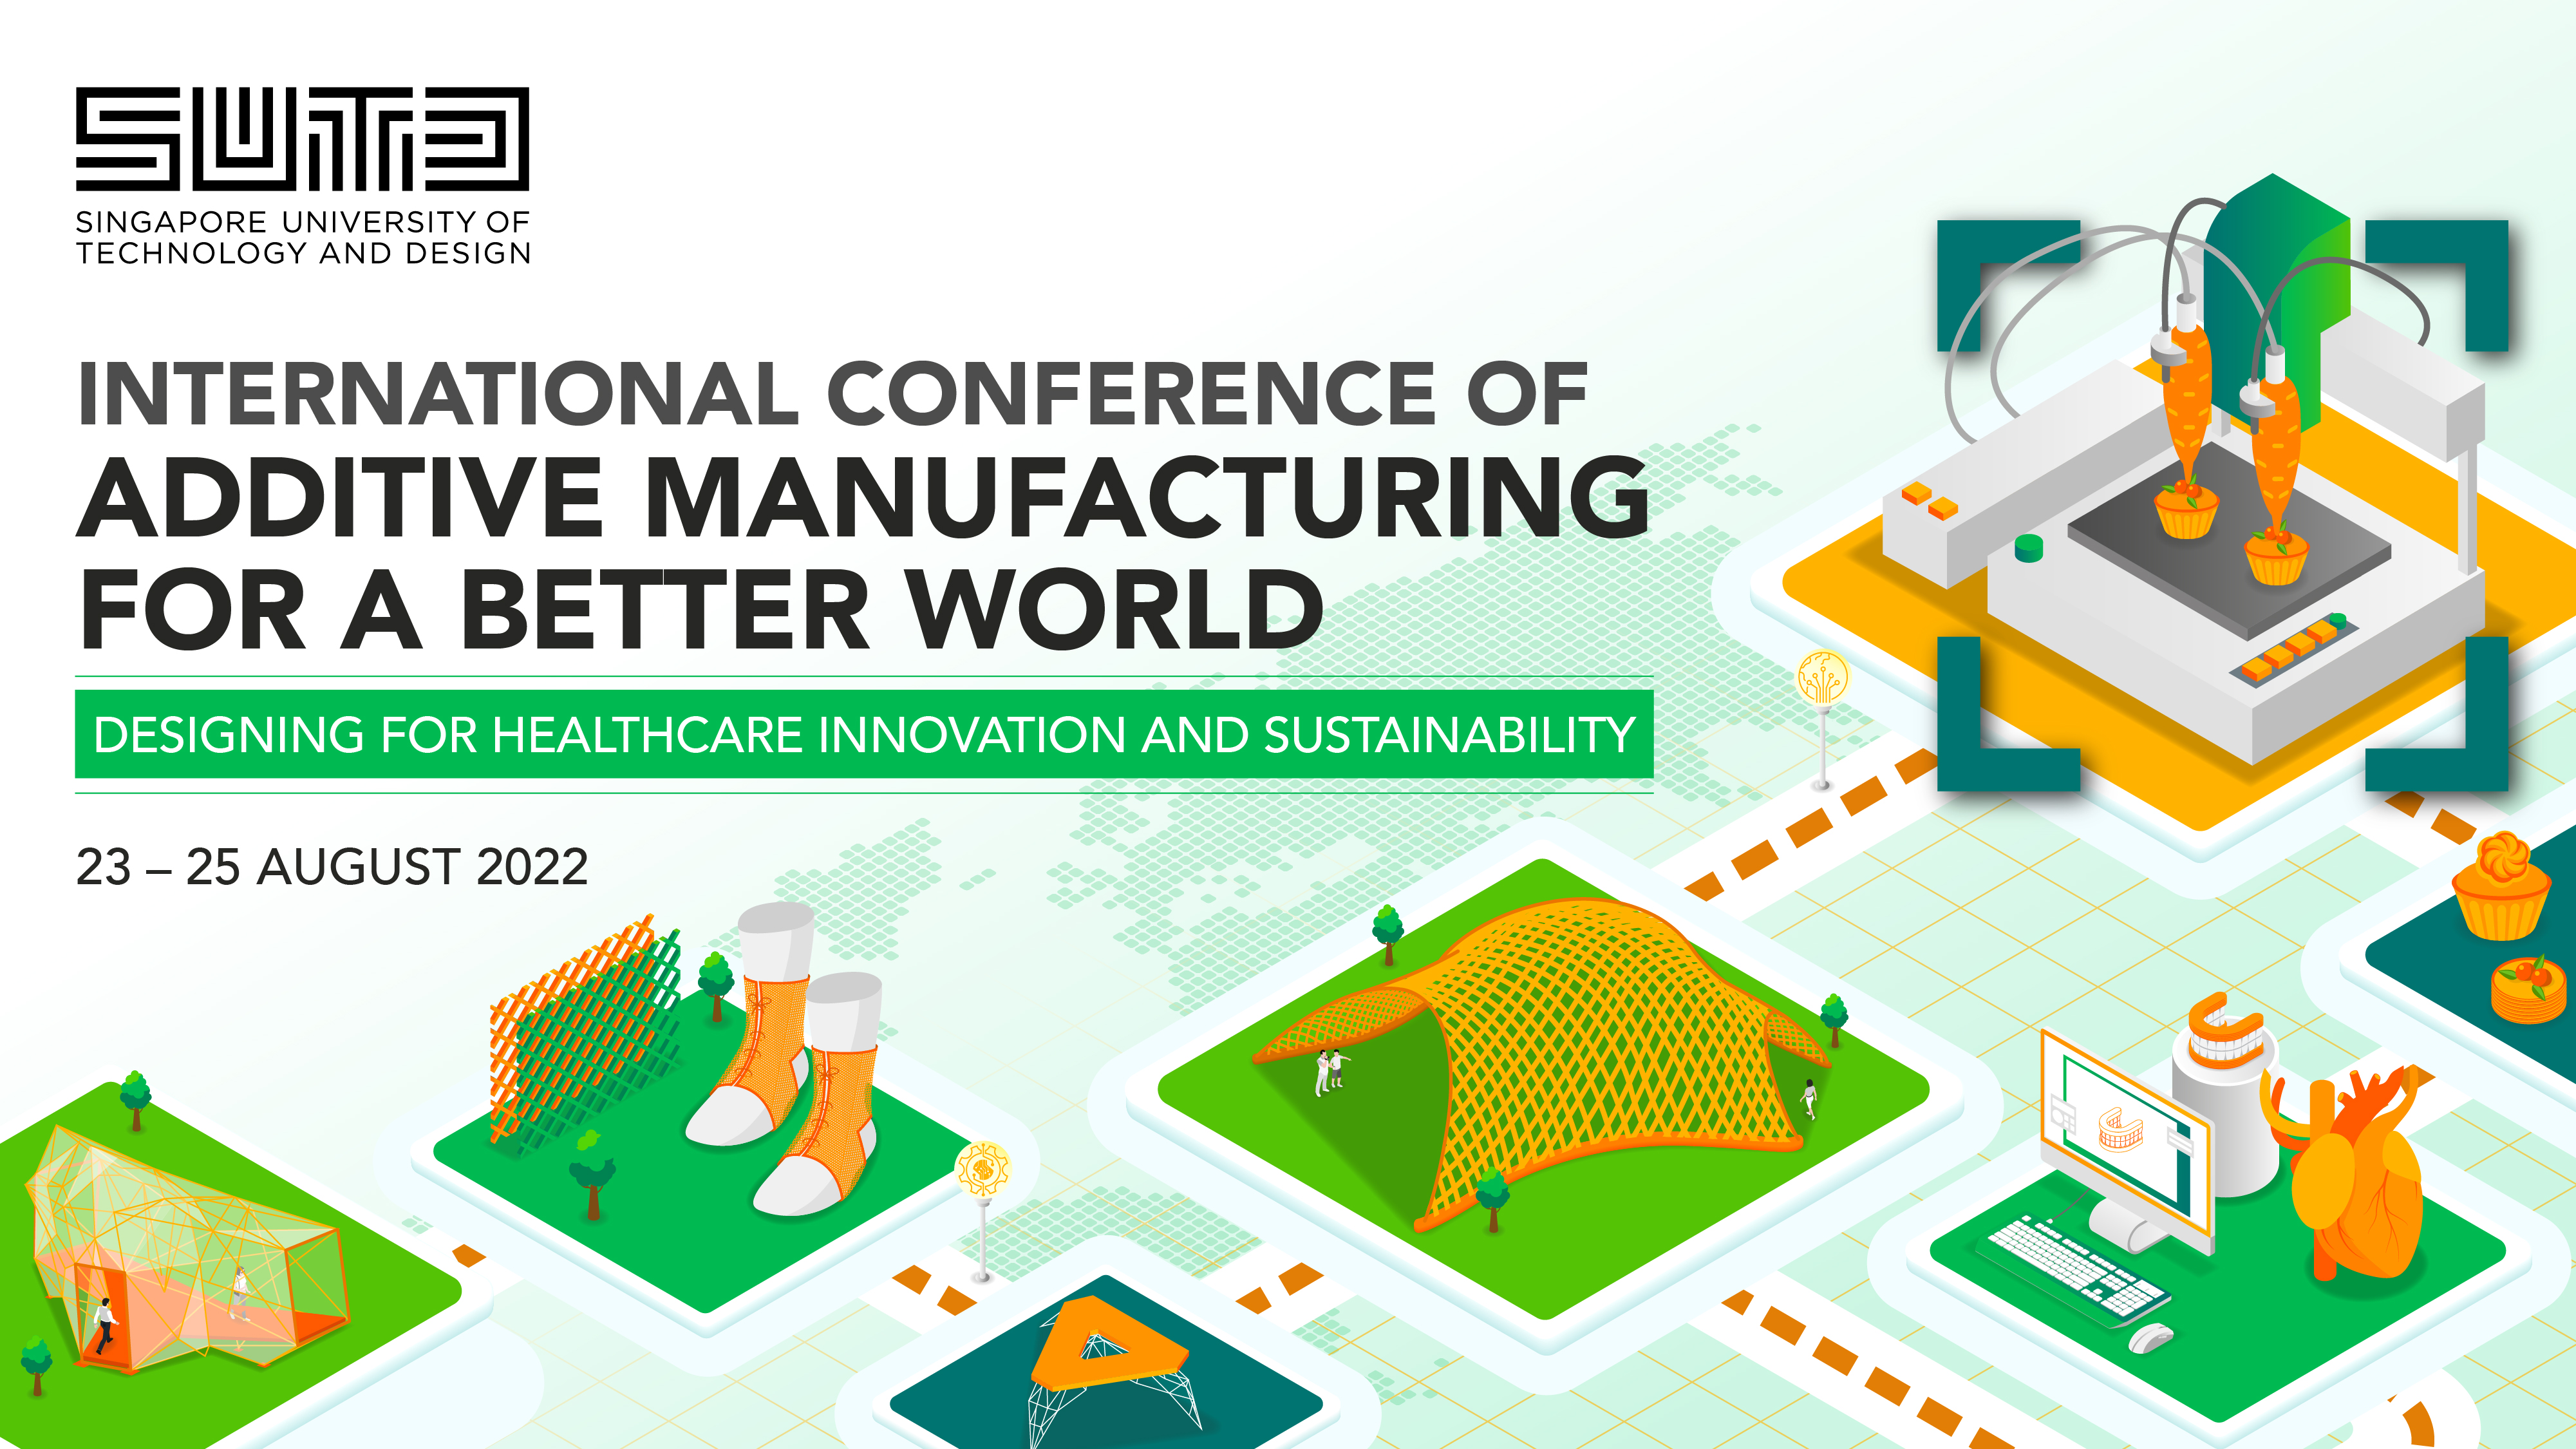 The International Conference of Additive Manufacturing (AM) for a Better World